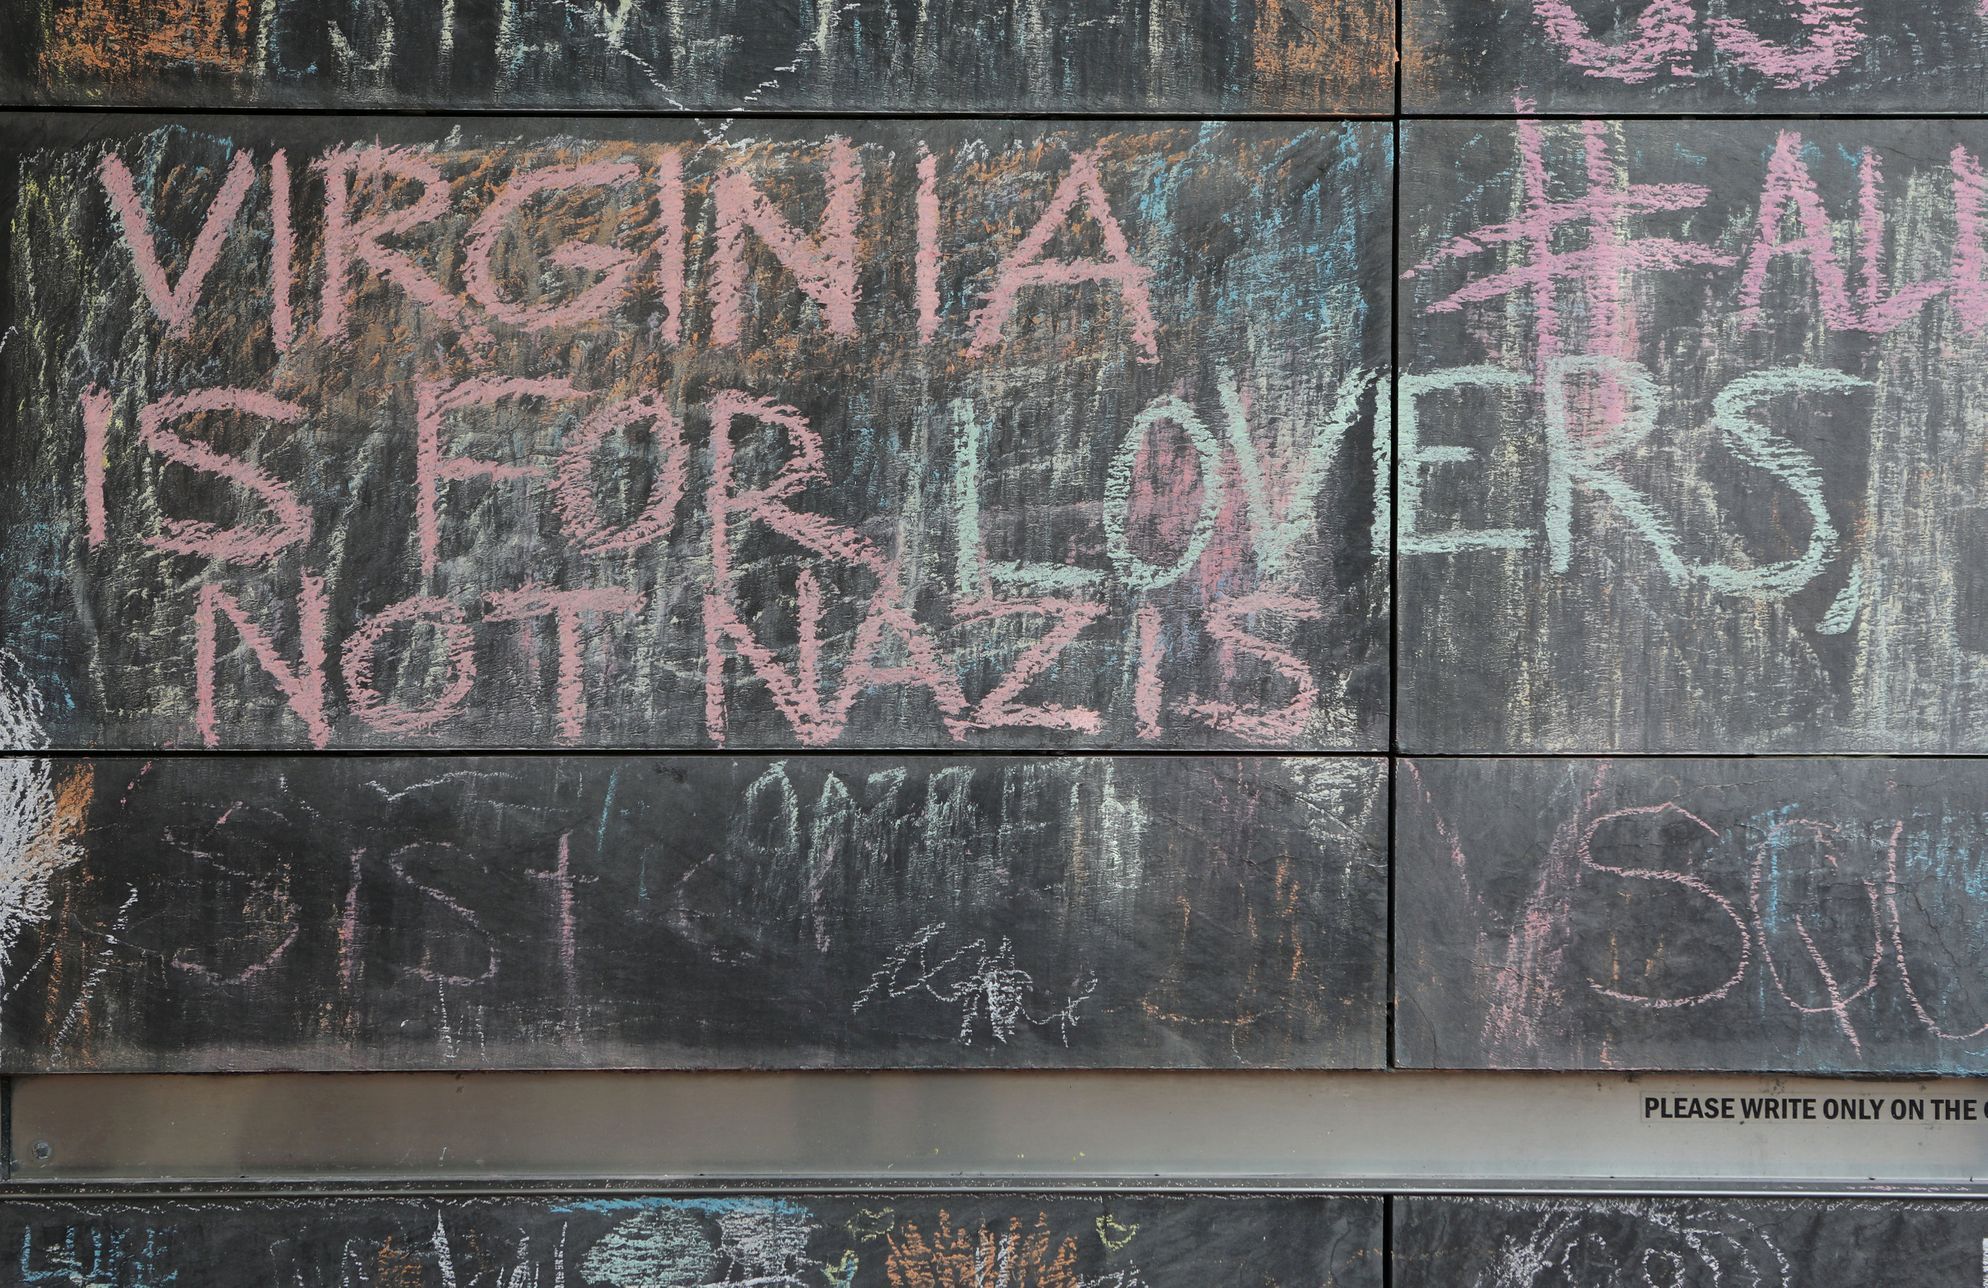 Virginia is for lovers not nazis